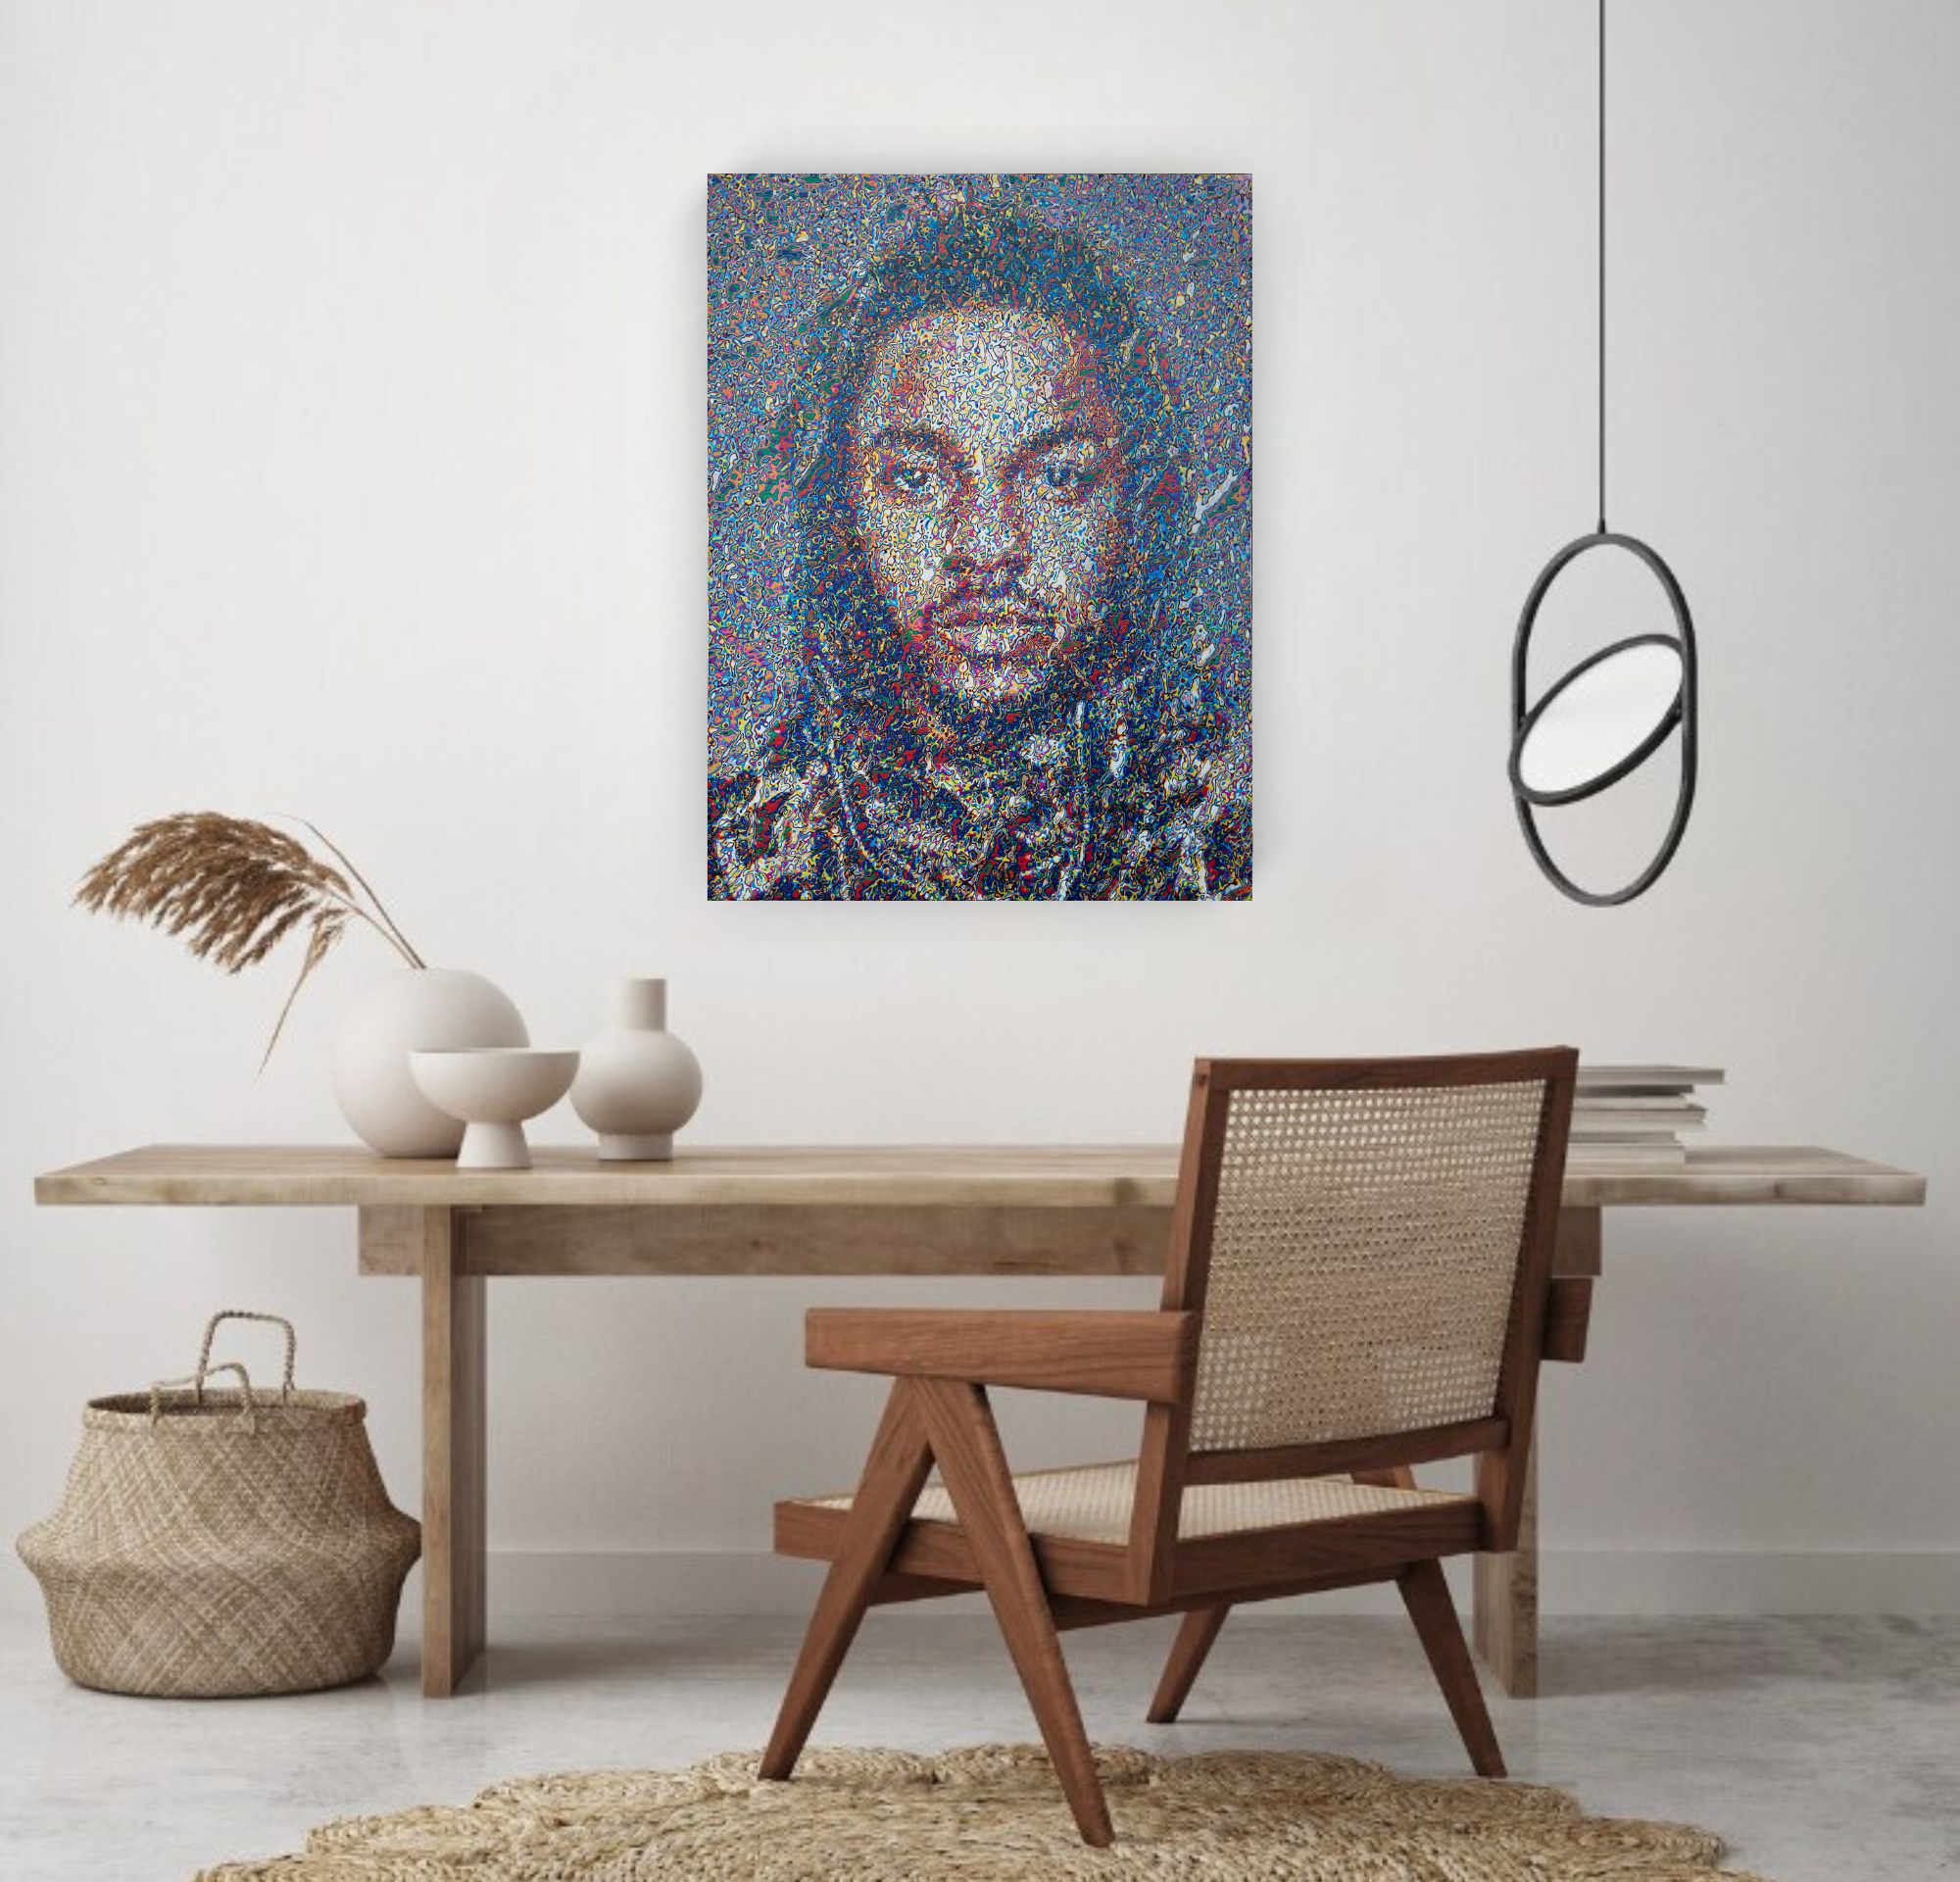 Kendrick, Exclusive Limited Edition on Canvas Queen Baeleit Art